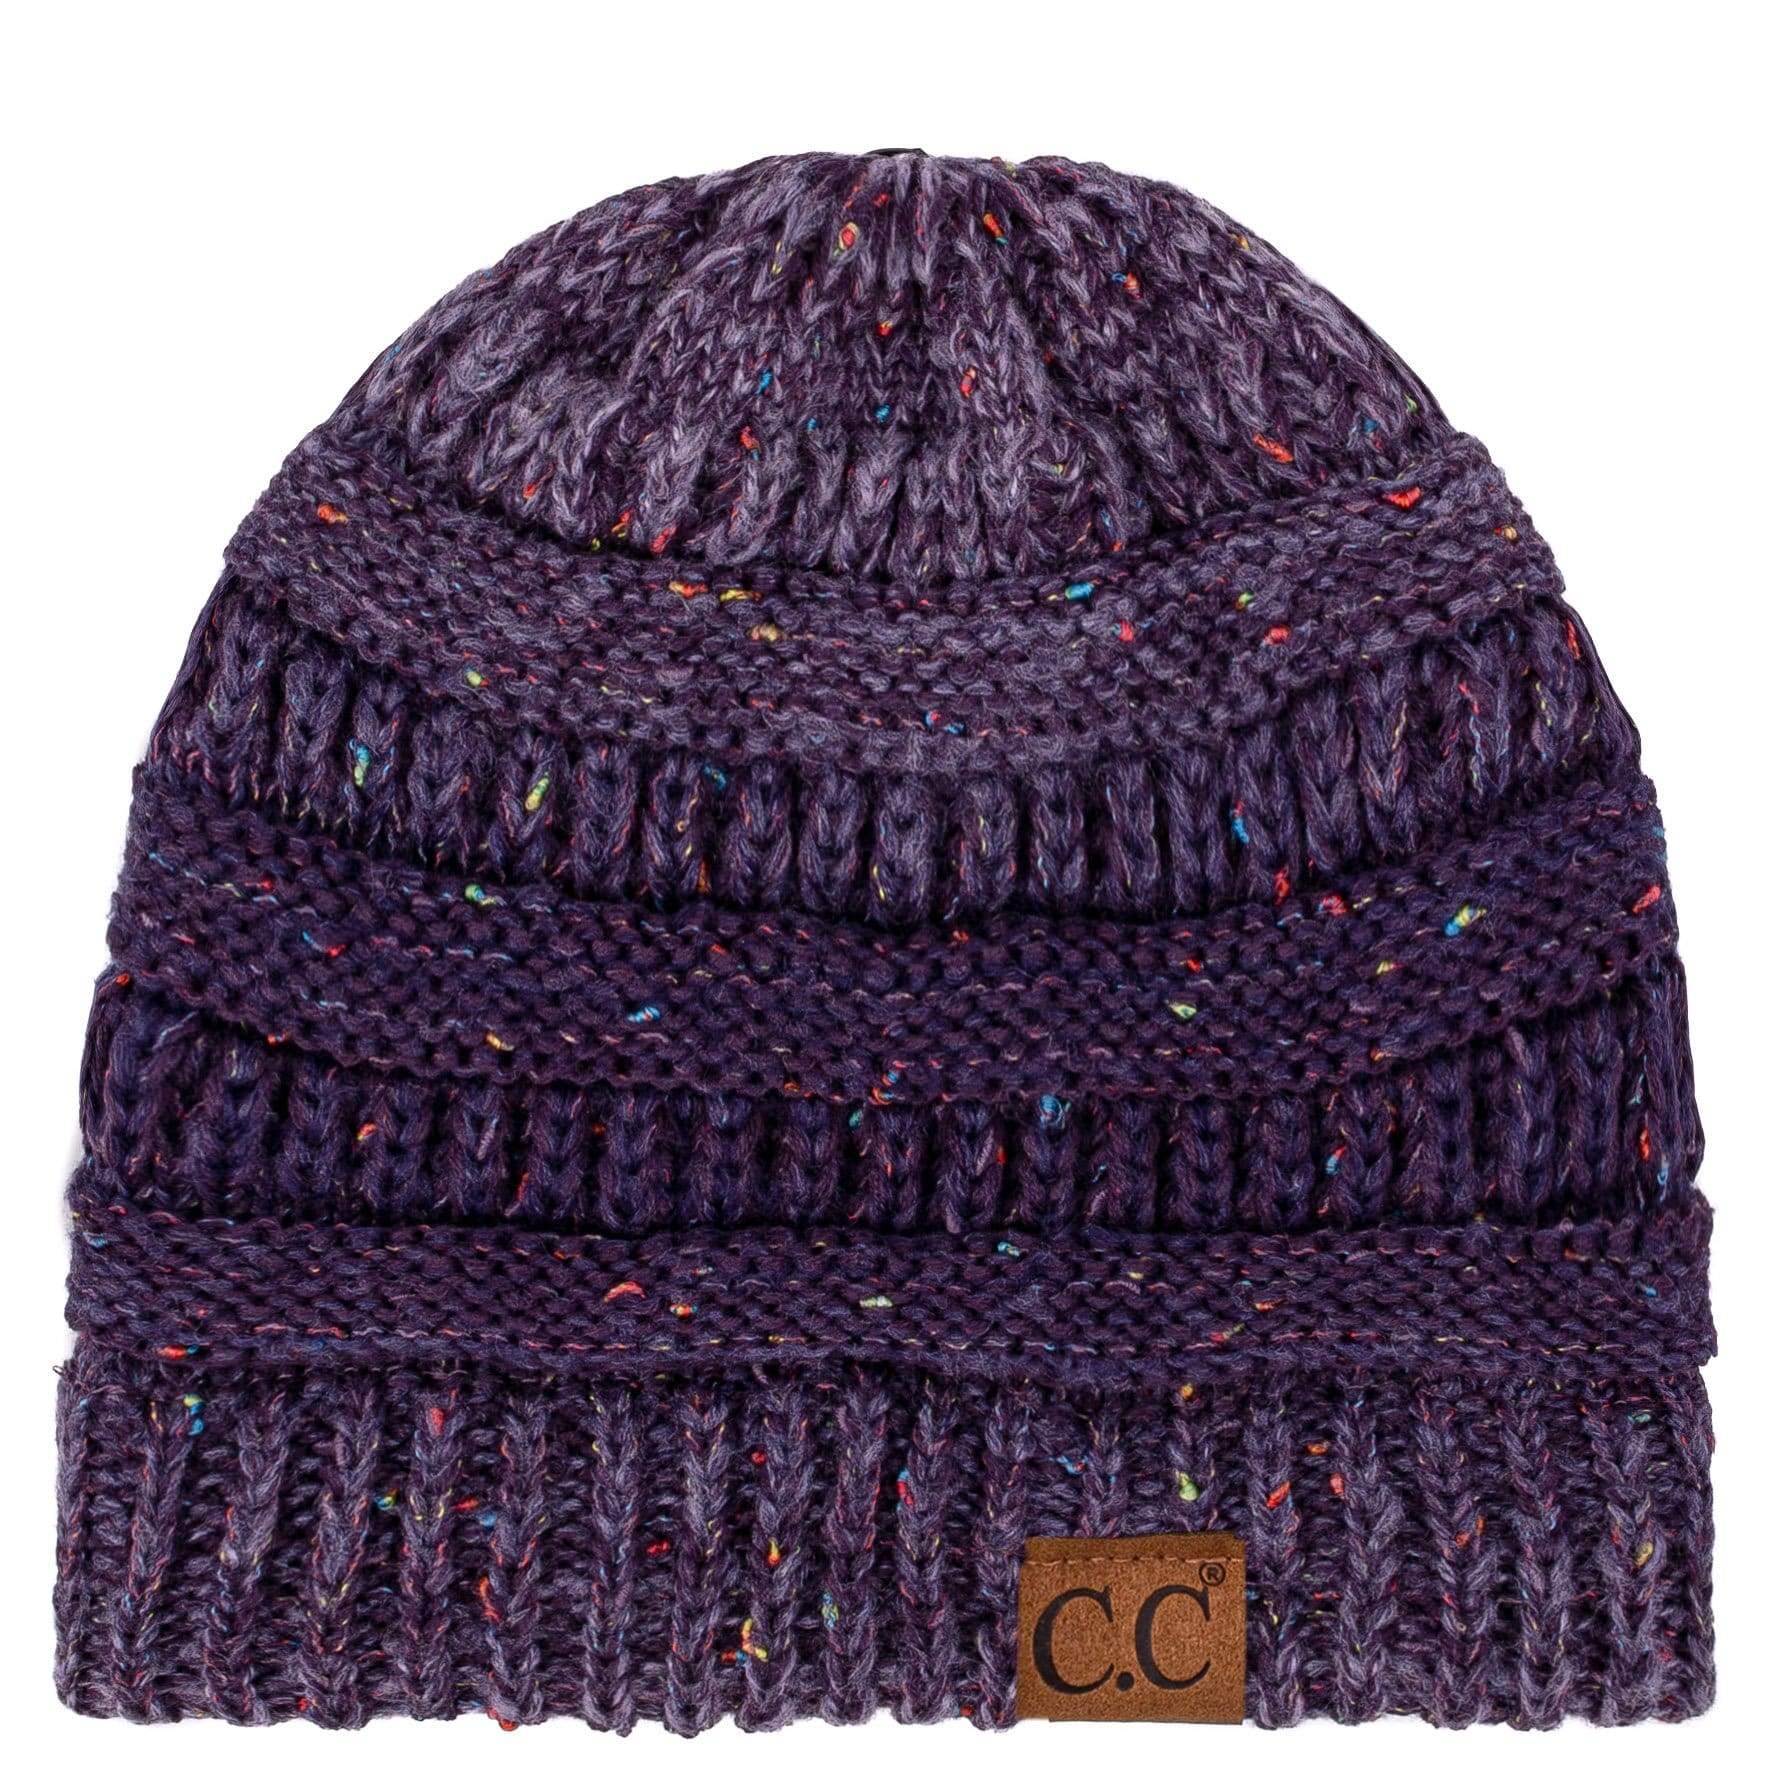 C.C Apparel Ombre Purple C.C Trendy Warm Chunky Soft Stretch Ombre Cable Knit Beanie Skully